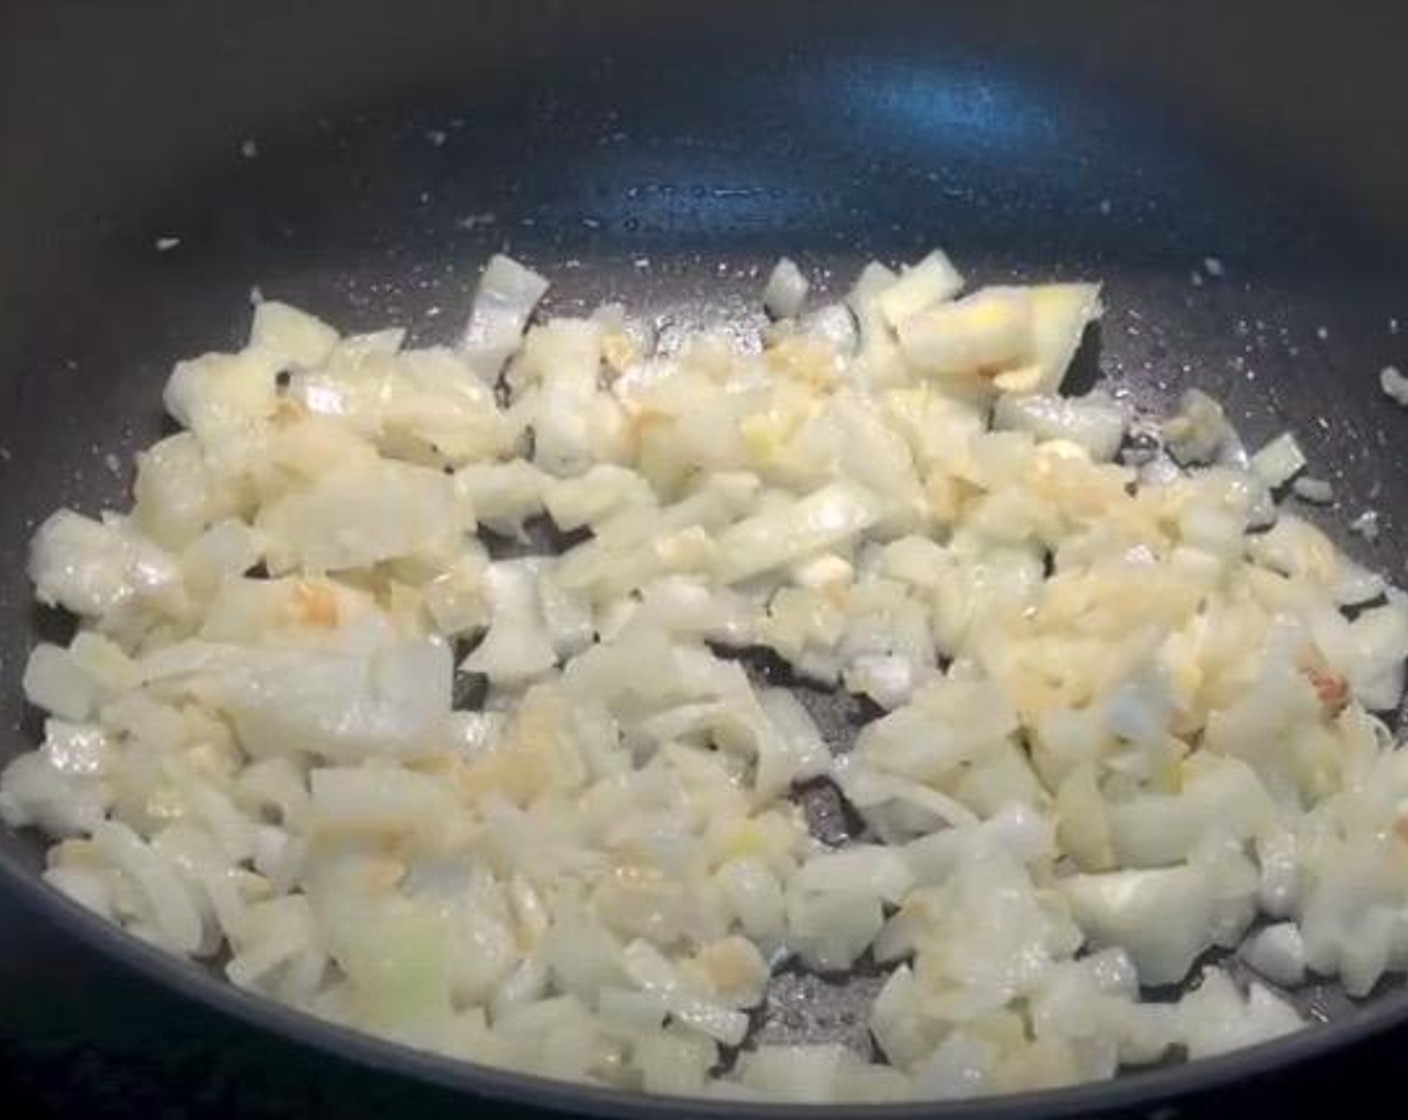 step 1 In a frying pan, add Olive Oil (2 Tbsp), Garlic (2 cloves) and Yellow Onion (1). Cook over medium heat until onions have softened.